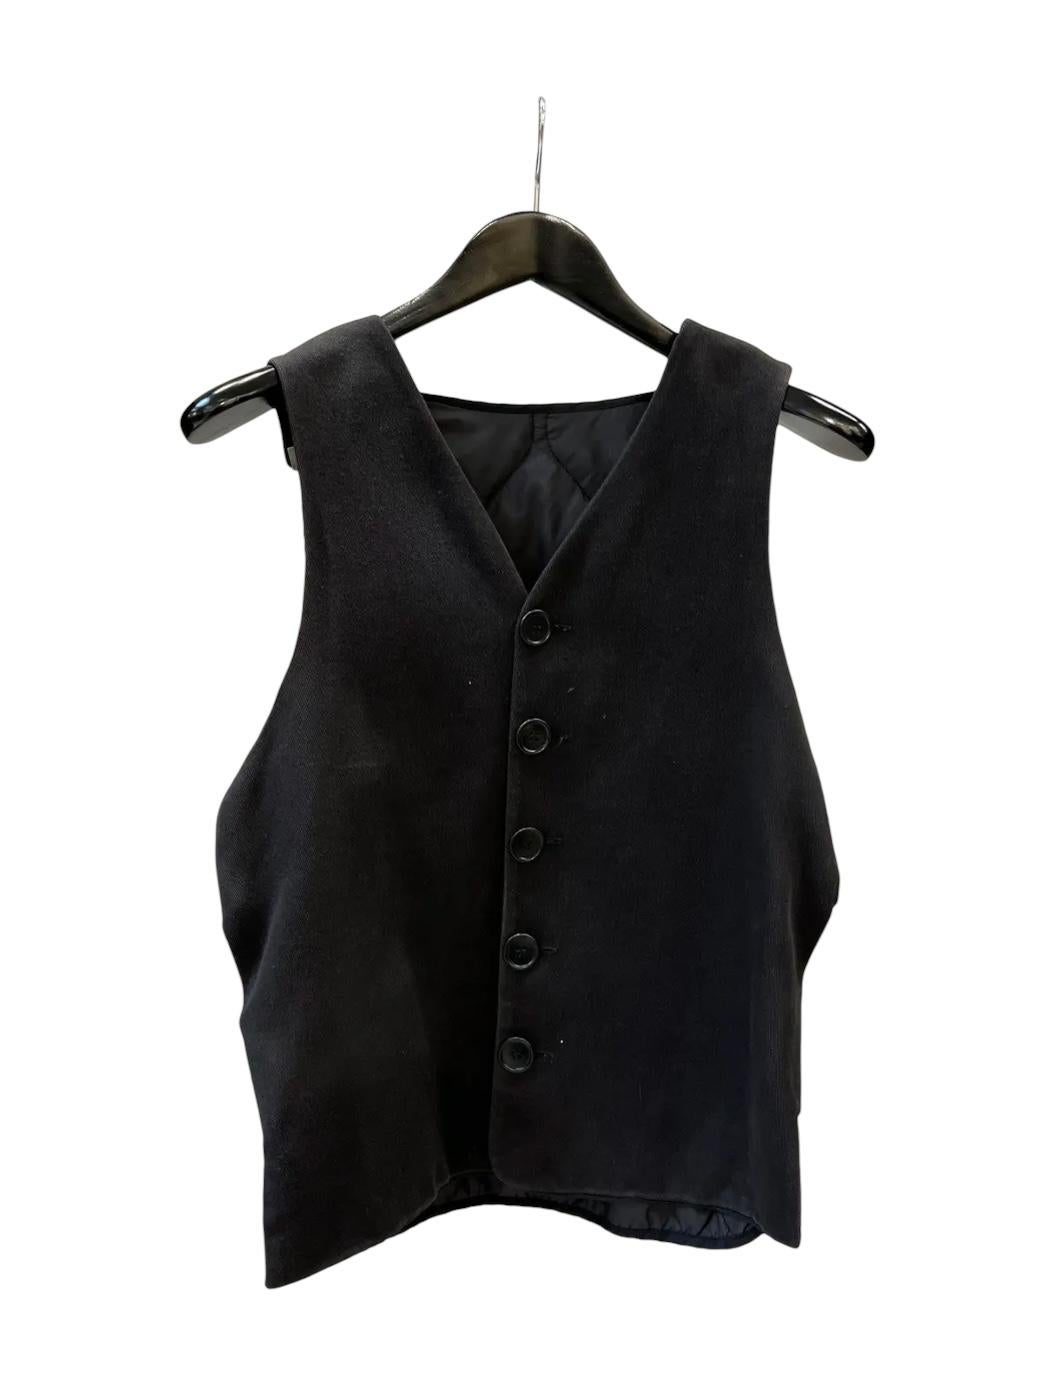 Dirk Bikkembergs
Hommes 1993 Quilted Hybrid Buckle Vest
Size 48

Beautiful Dirk Bikkembergs Hommes quilted buckle vest from the 1993 collection. In great condition, made in Italy.